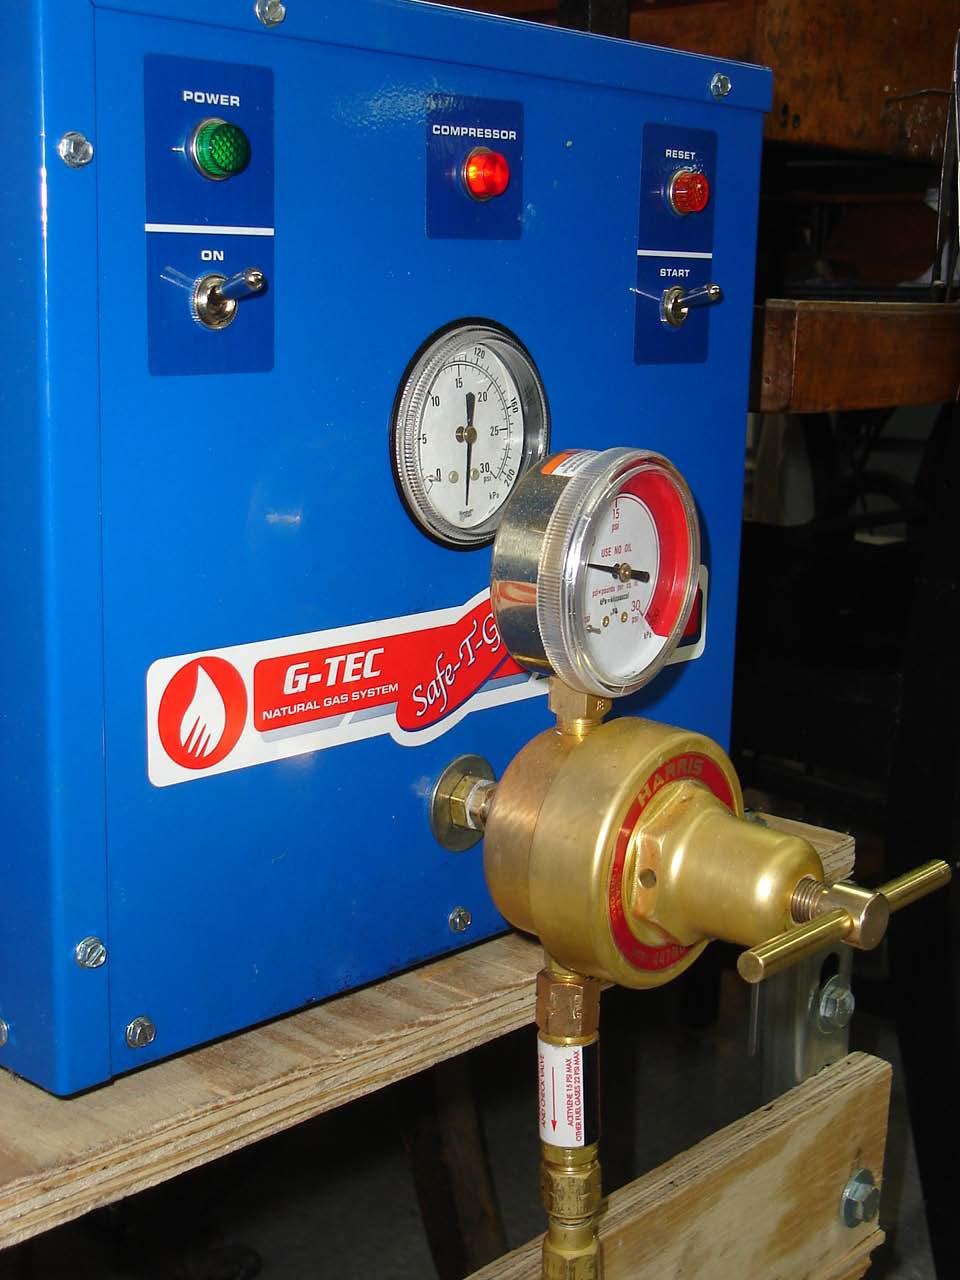 Appendix A: Photograph of a Typical Natural Gas Torch Booster Regulator